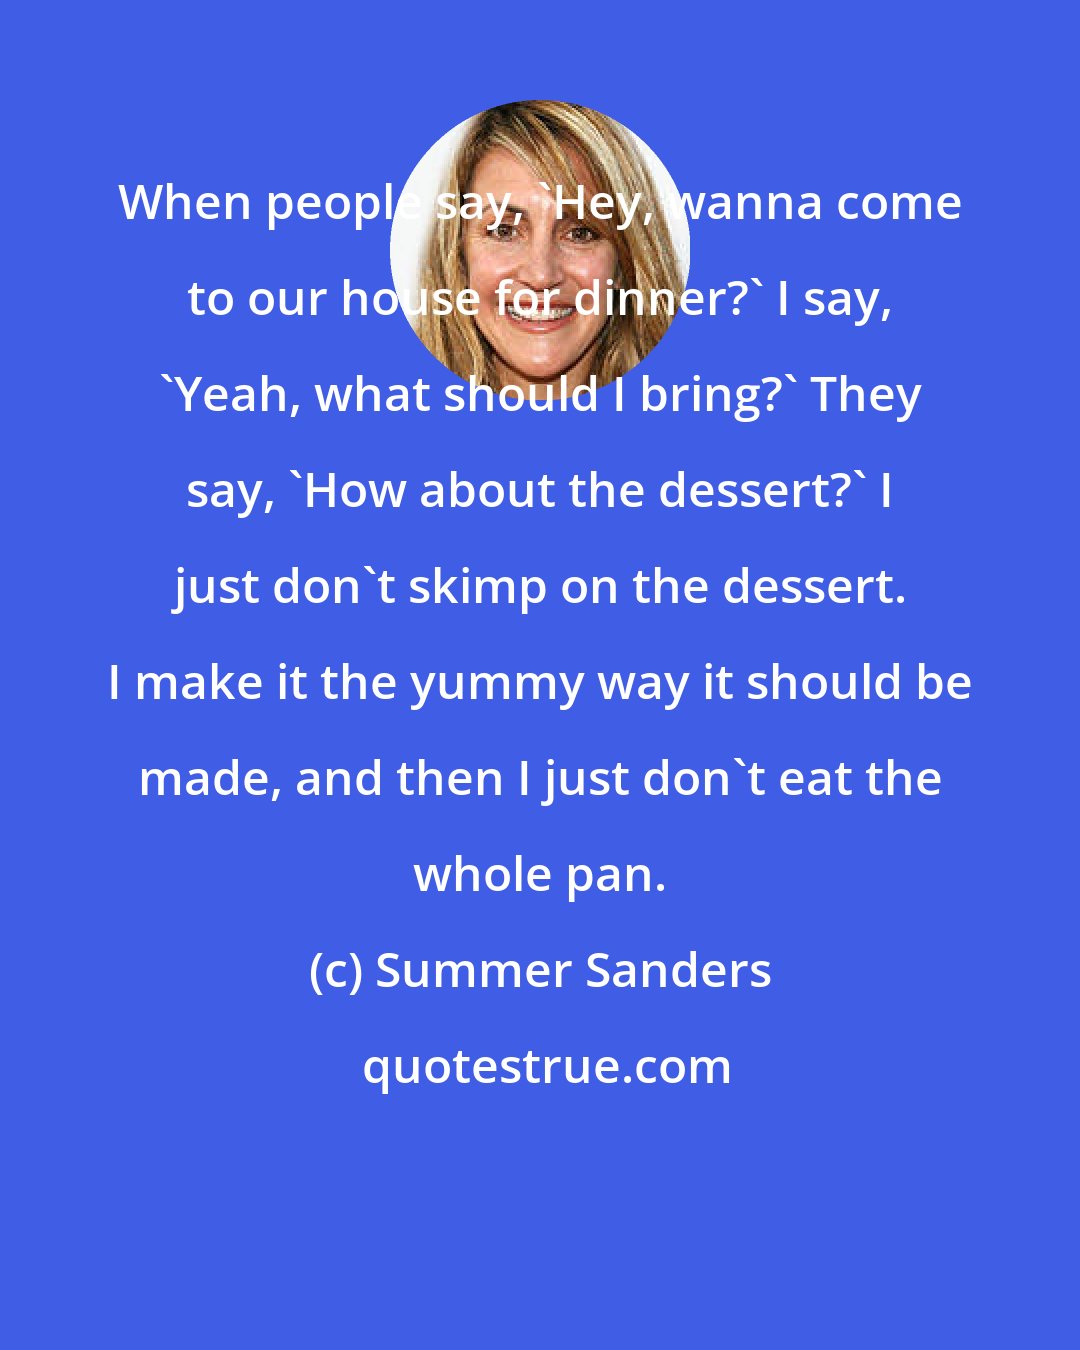 Summer Sanders: When people say, 'Hey, wanna come to our house for dinner?' I say, 'Yeah, what should I bring?' They say, 'How about the dessert?' I just don't skimp on the dessert. I make it the yummy way it should be made, and then I just don't eat the whole pan.